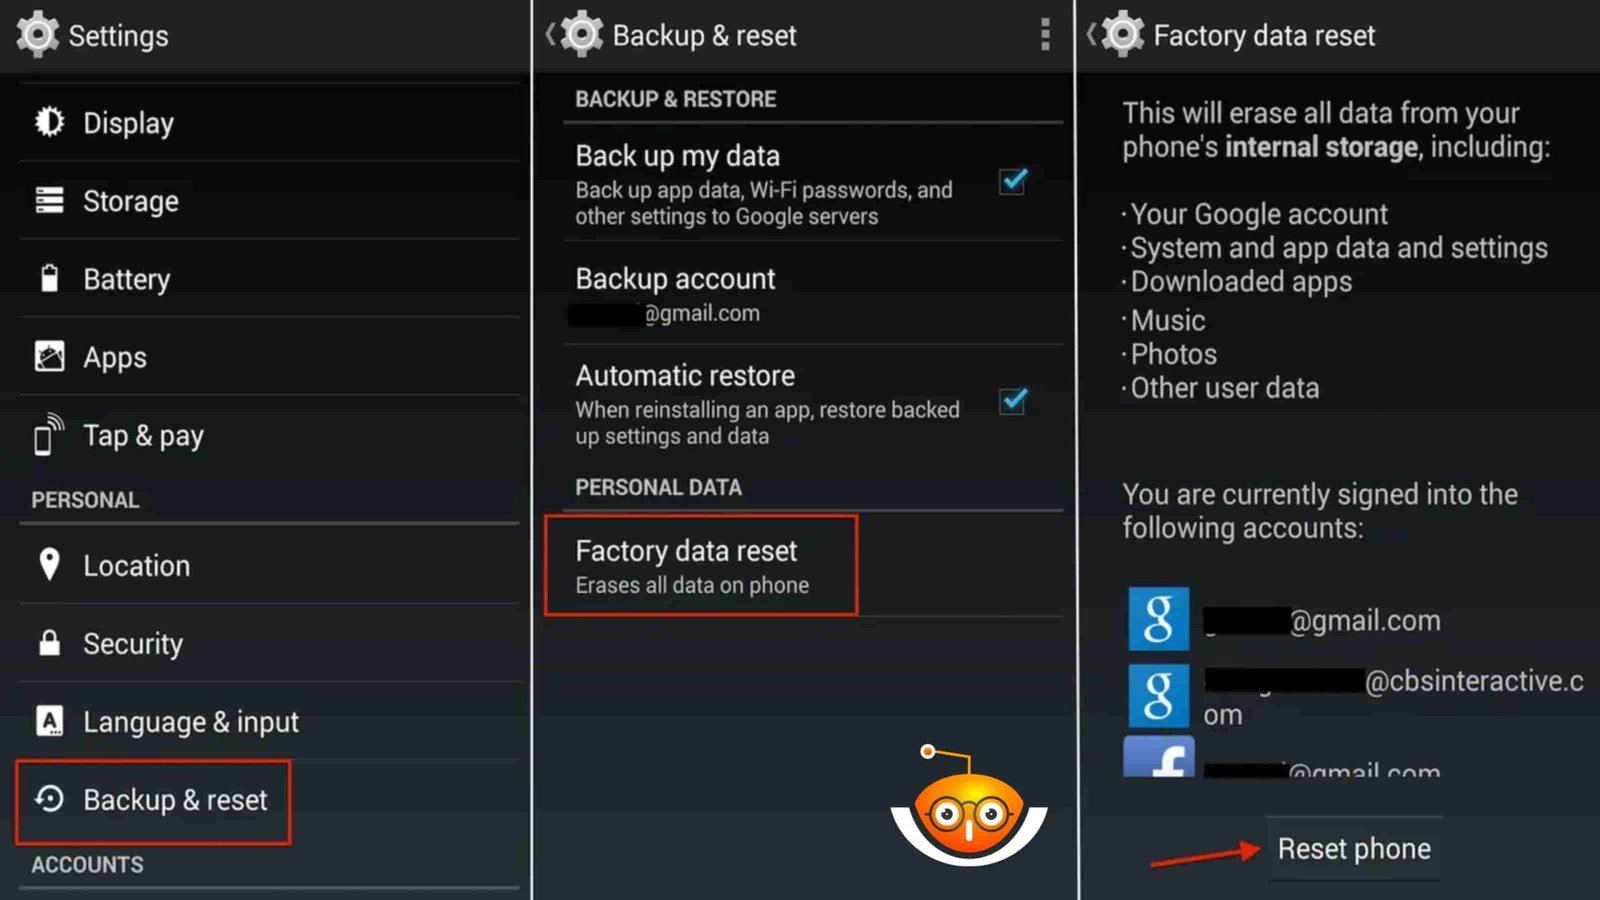 How to Factory Reset S23 - Step-by-Step Guide